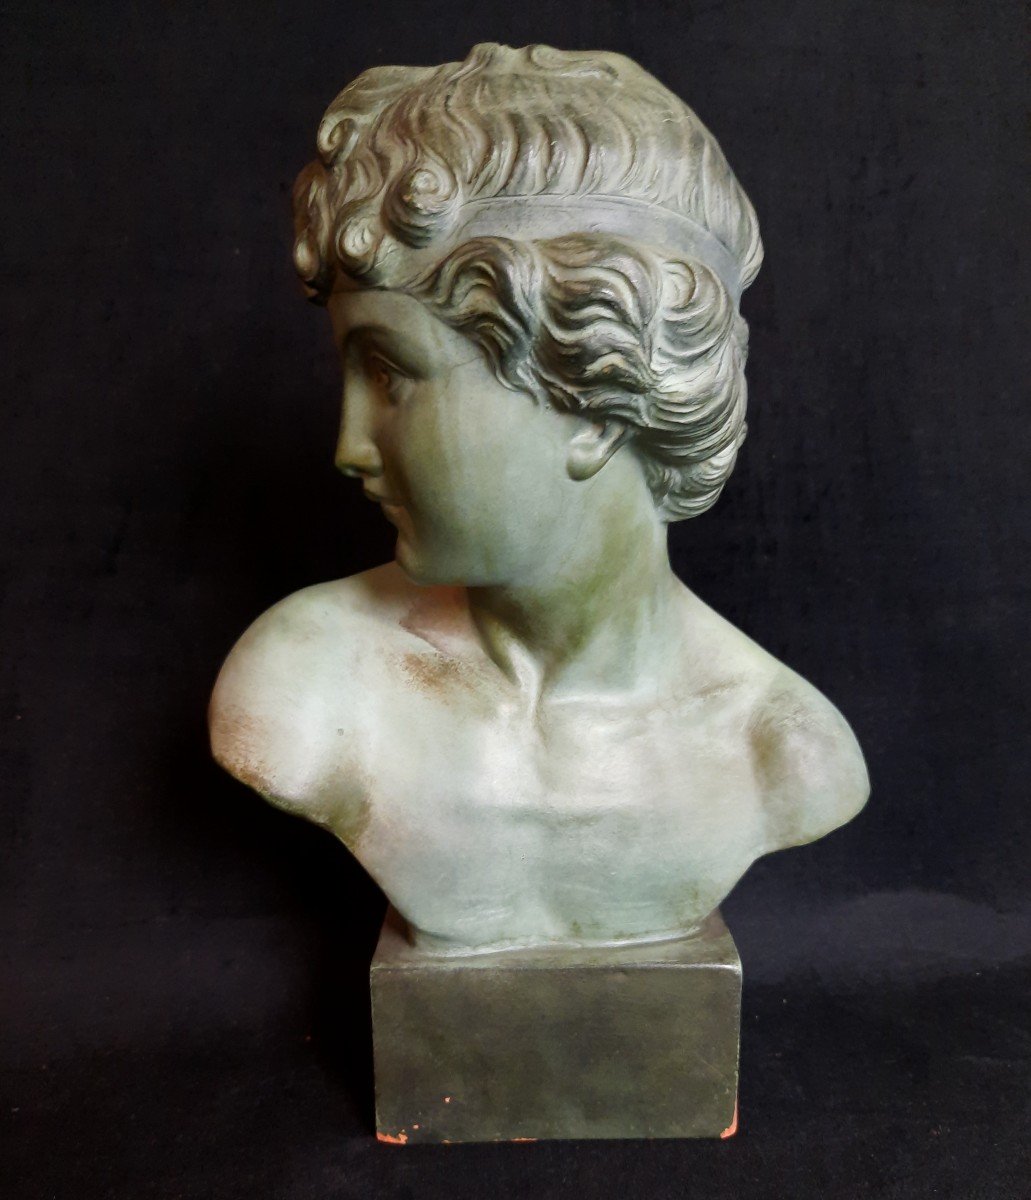 Terracotta Sculpture / Bust Of A Young Man (20th Century)